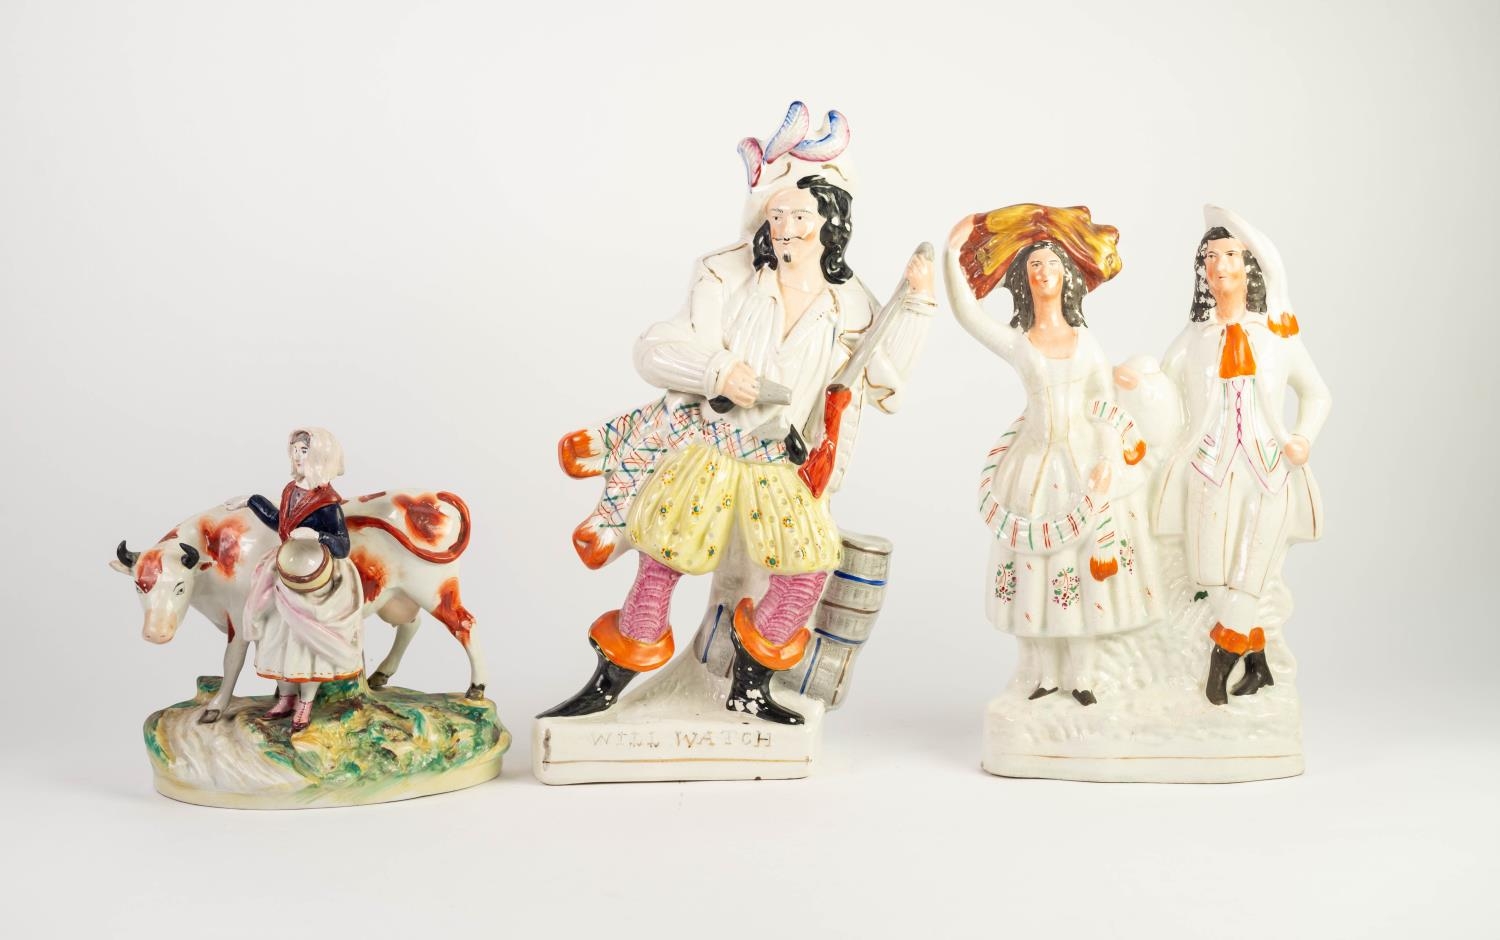 VICTORIAN STAFFORDSHIRE FLAT-BACK POTTERY FIGURE 'Will Watch', 15in (38cm) high (c/r flaking to